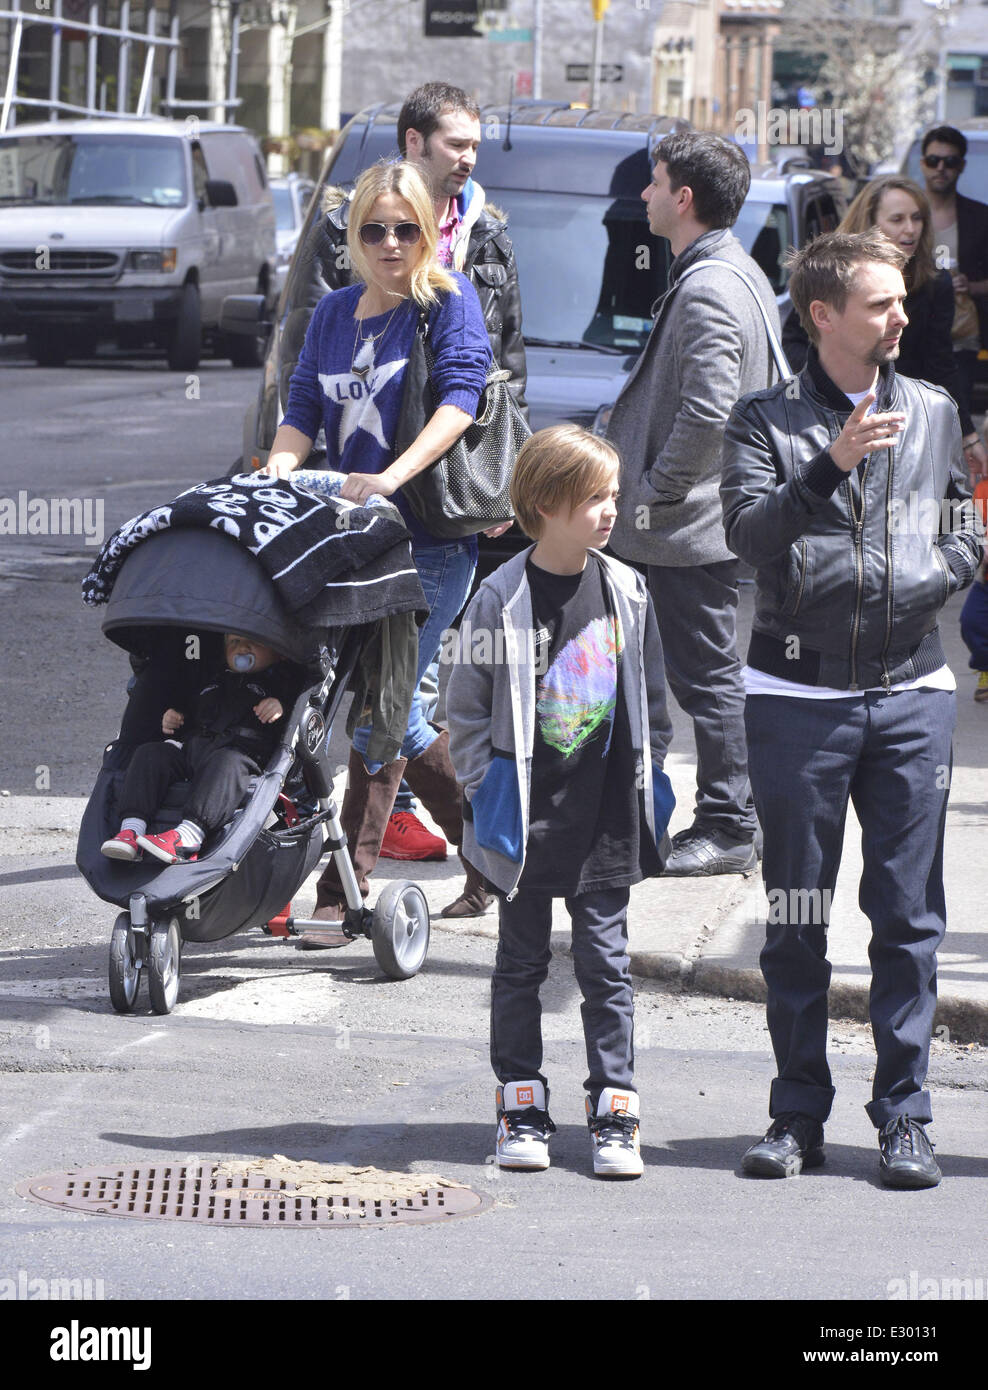 Kate Hudson takes her son Bingham Hawn Bellamy out in a stroller and head  for lunch with family at Bubby's restaurant in Manhattan Featuring: Kate  Hudson,Matt Bellamy,Bingham Bellamy,Ryder Robinson Where: New York